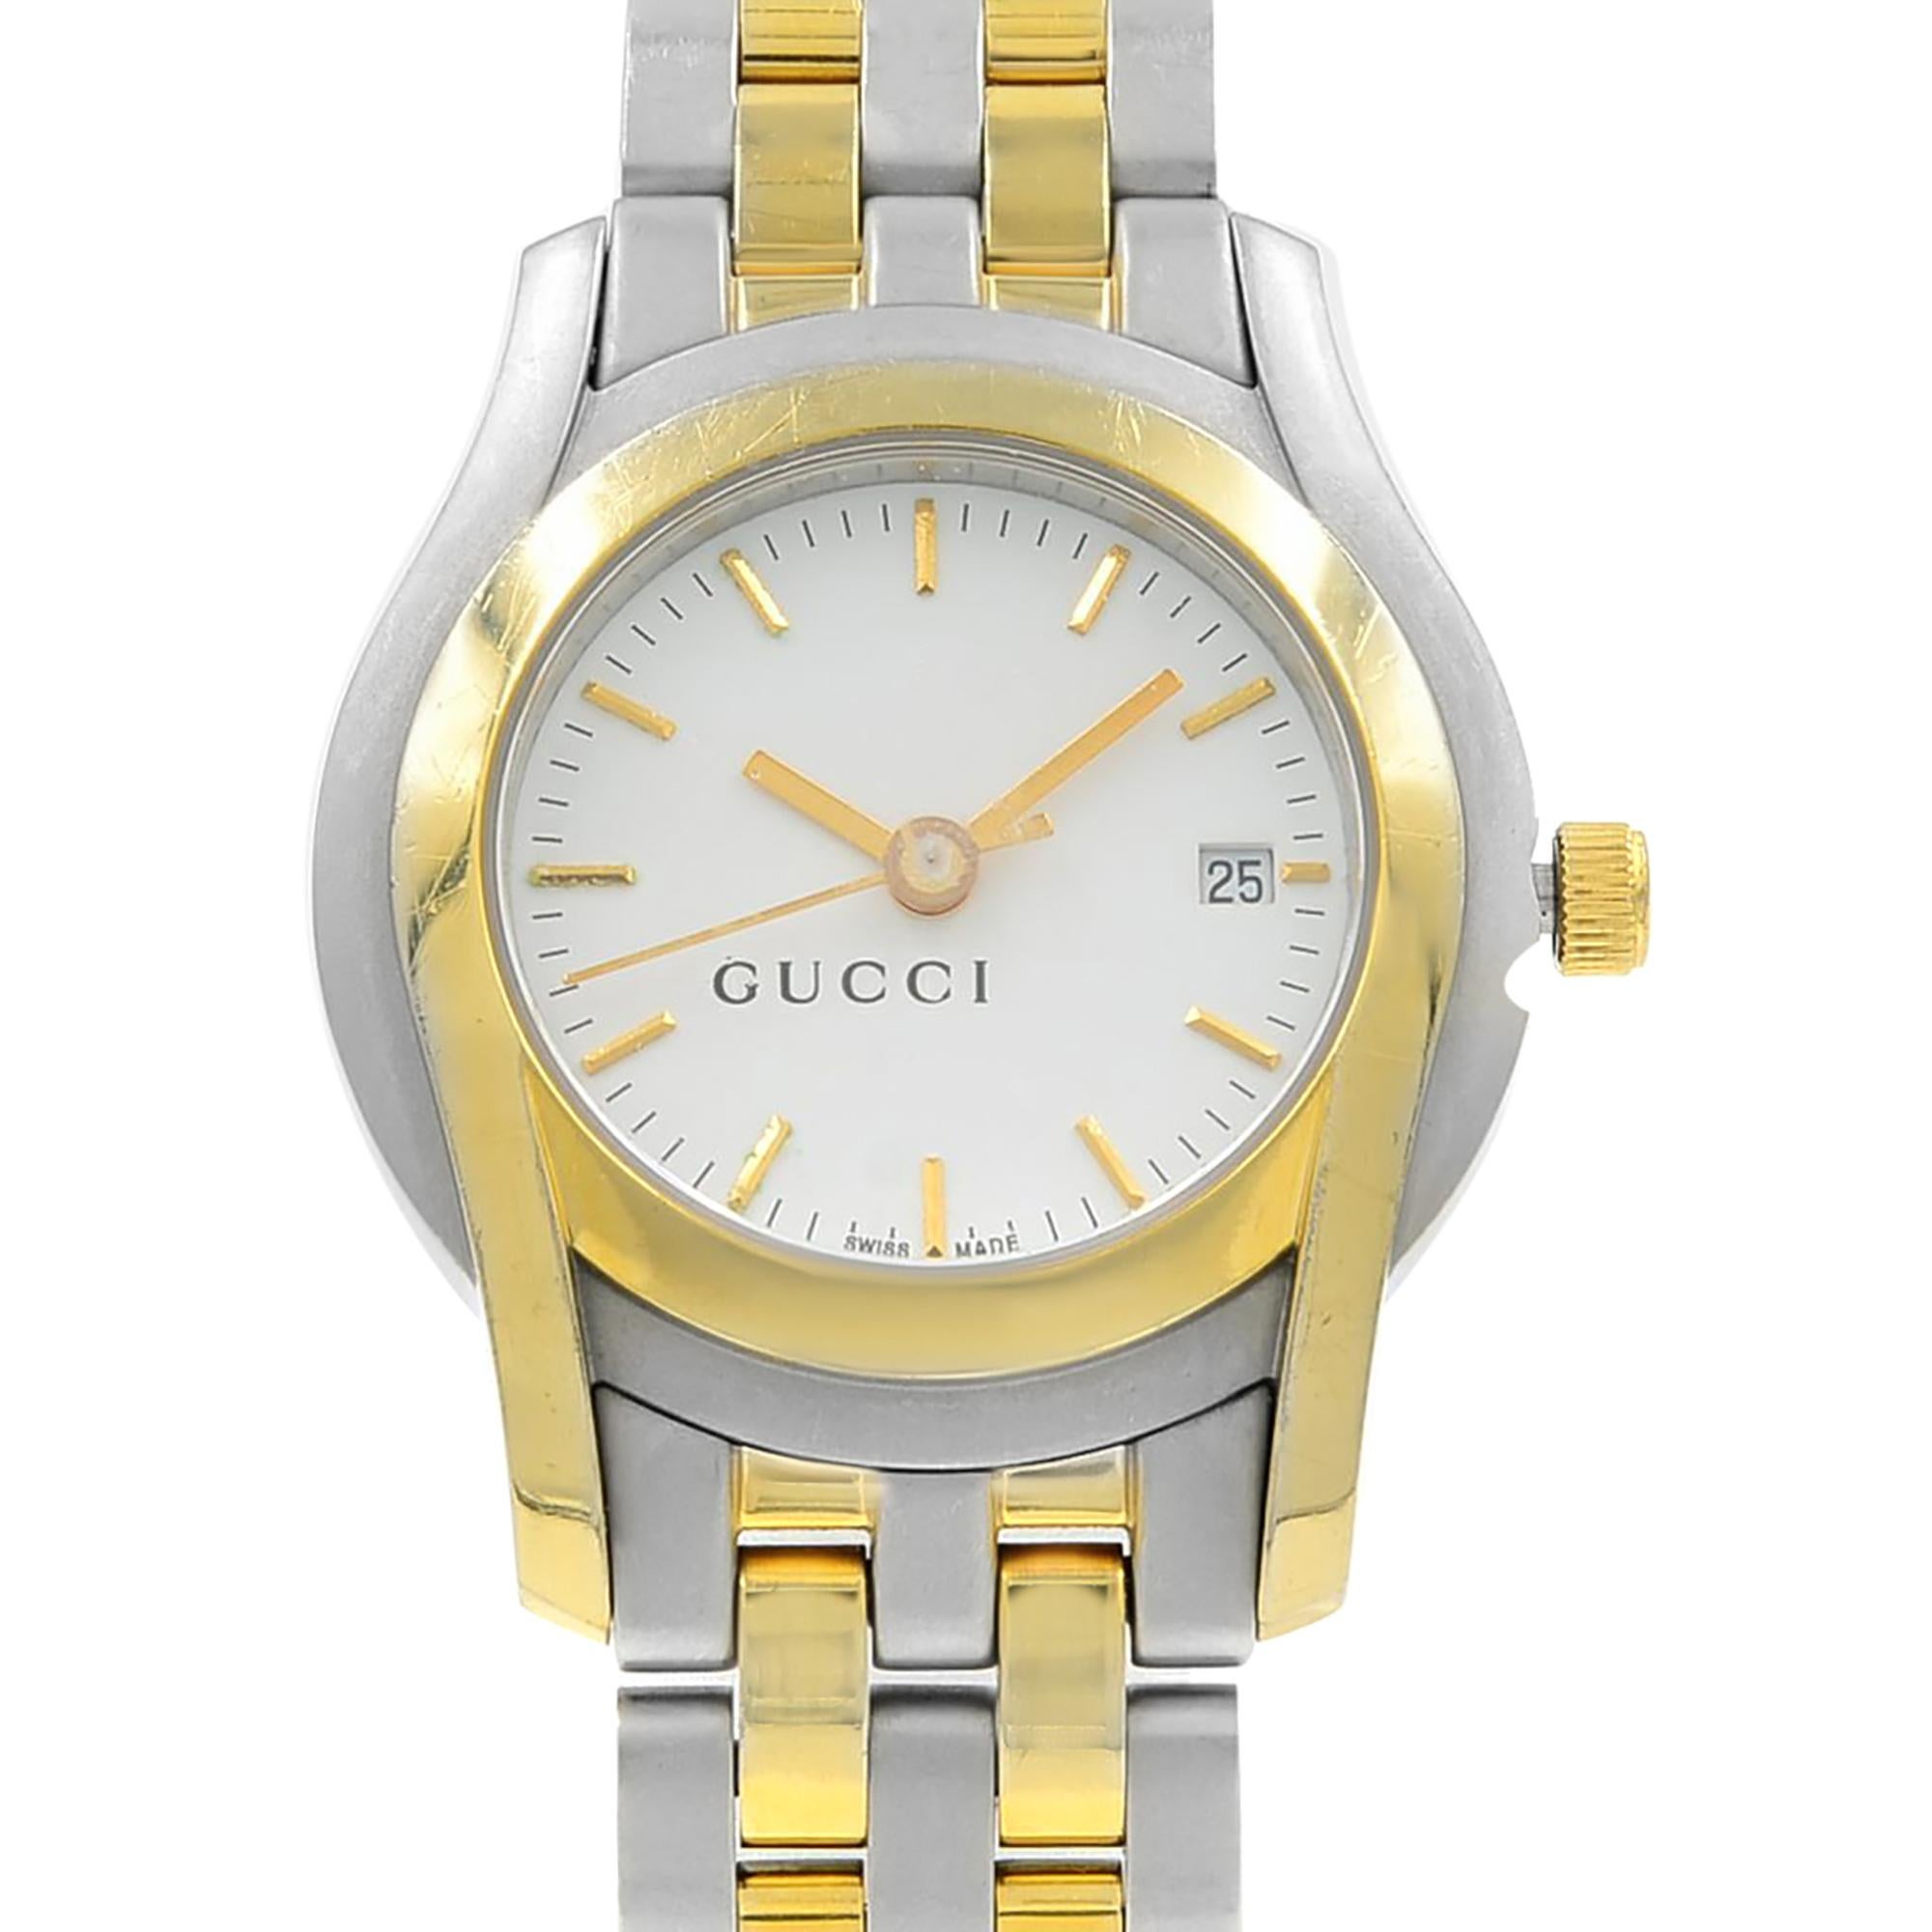 This pre-owned Gucci 5500L  YA055528 is a beautiful Ladies timepiece that is powered by a quartz movement which is cased in a stainless steel case. It has a round shape face, date dial and has hand sticks style markers. It is completed with a